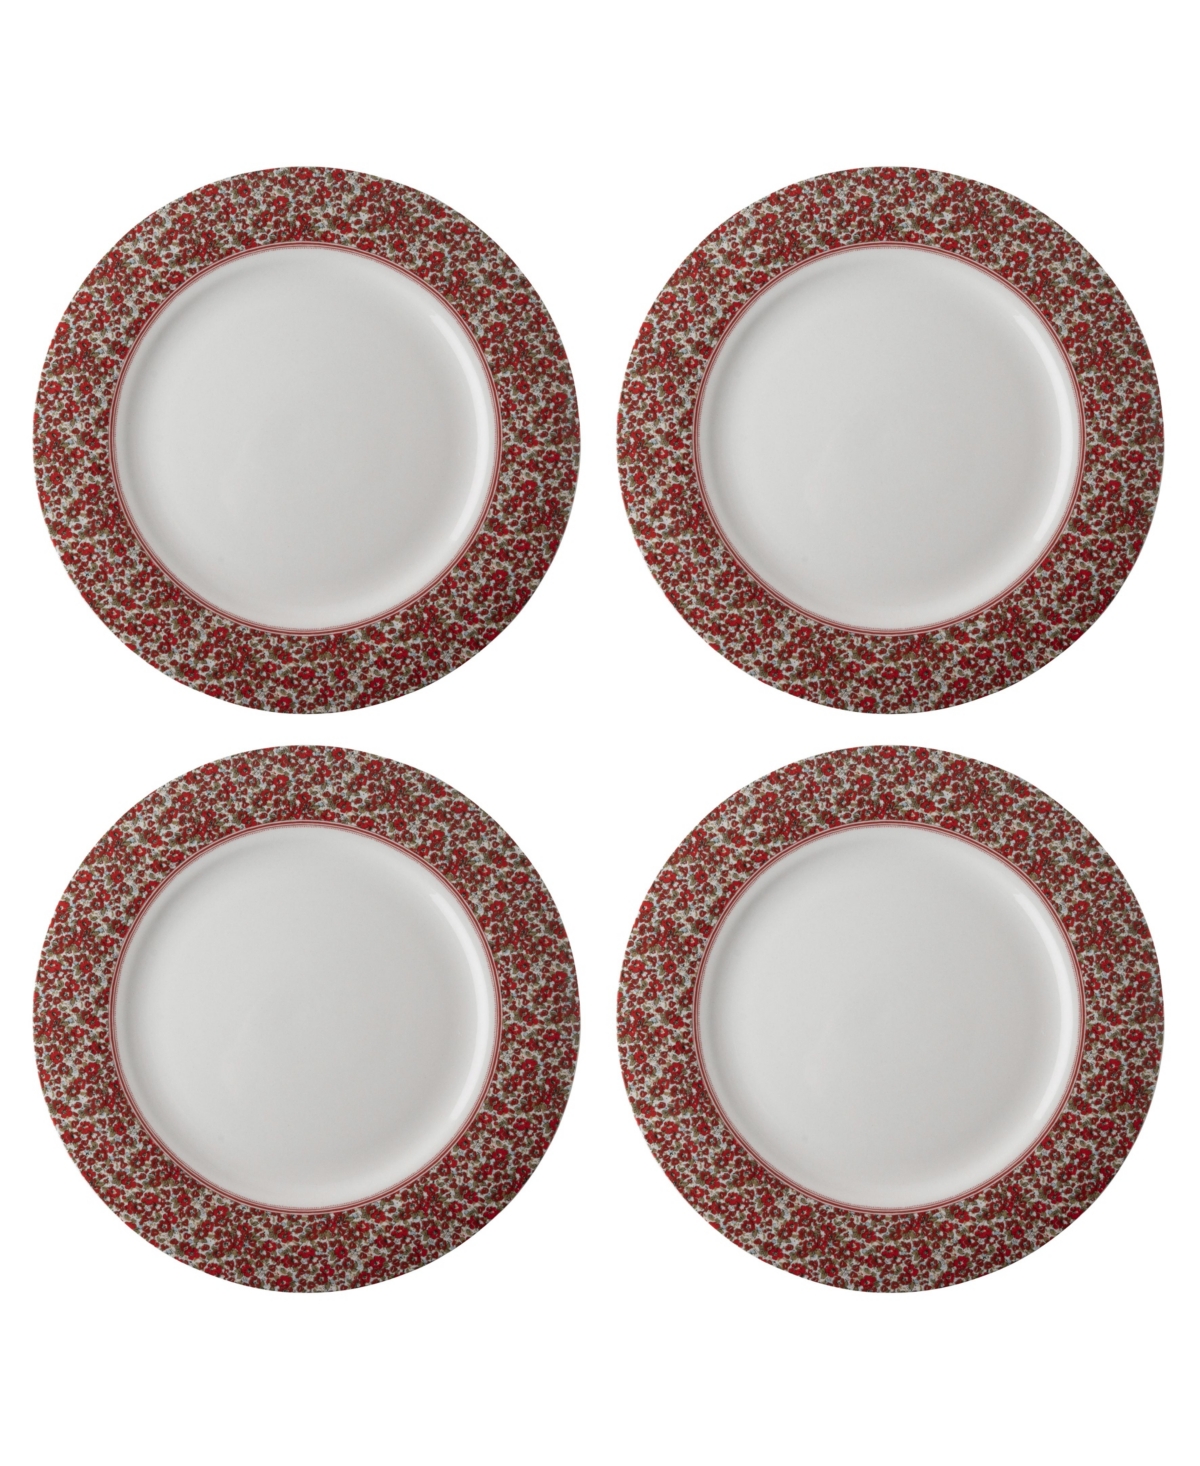 Laura Ashley Plates Stockbridge Collectables Gift Set, 4 Piece In Red